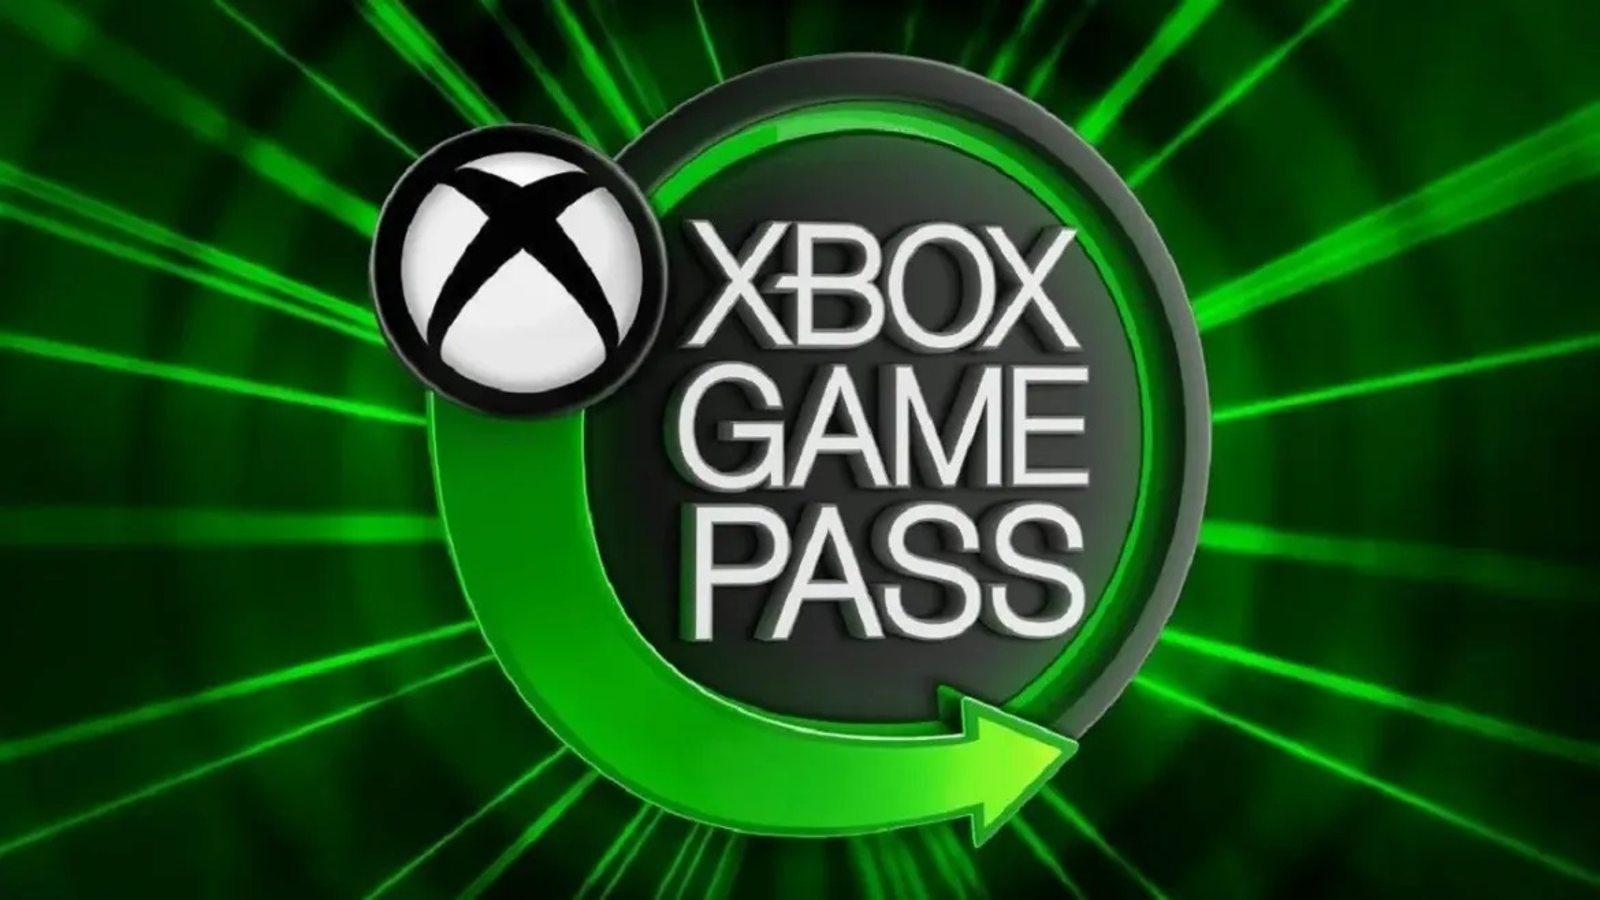 Microsoft may be introducing cheaper, ad-supported Xbox Game Pass tiers